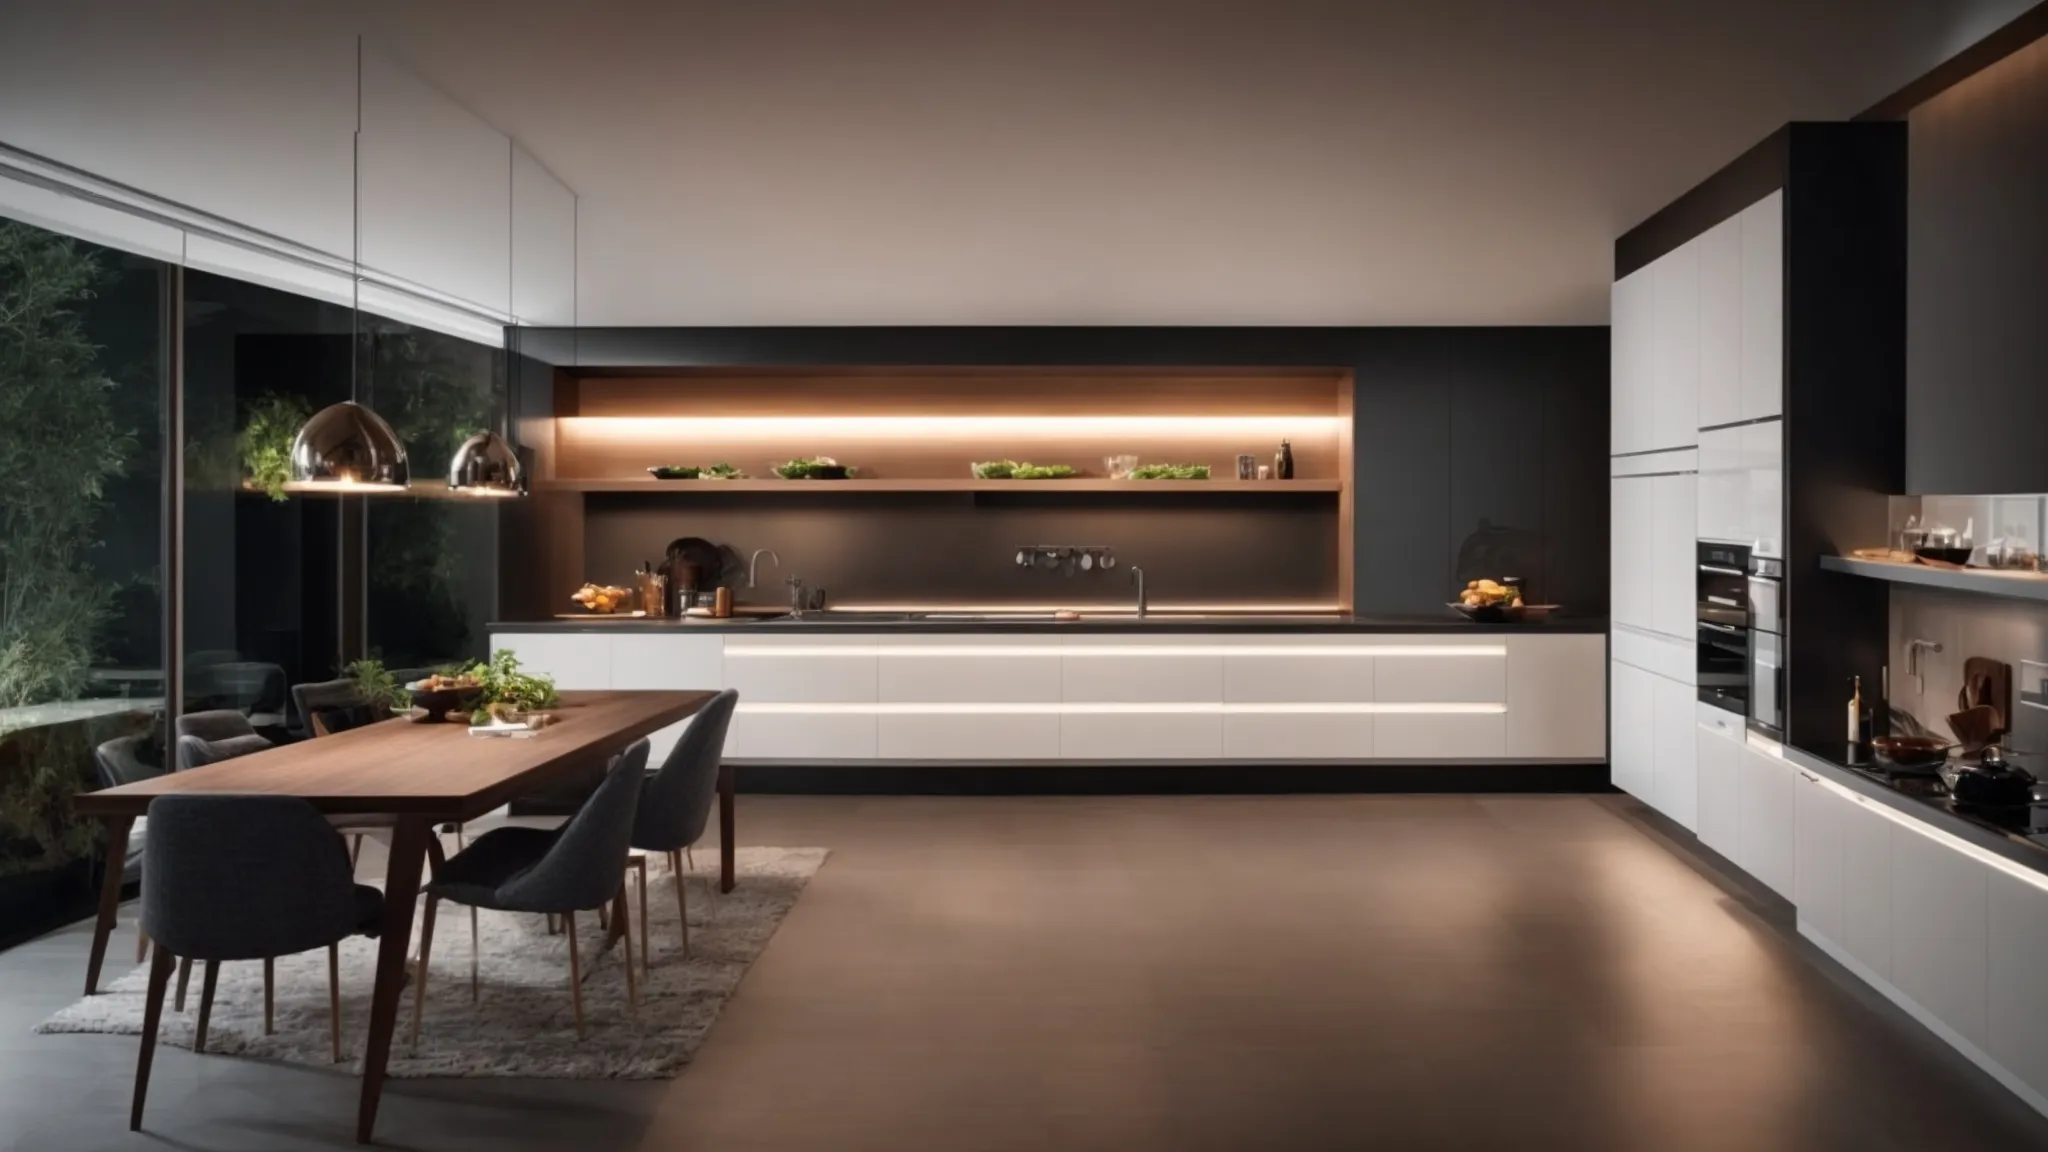 a sleek, modern kitchen illuminated by ambient lighting features an interactive smart display on the wall, controlling various appliances.